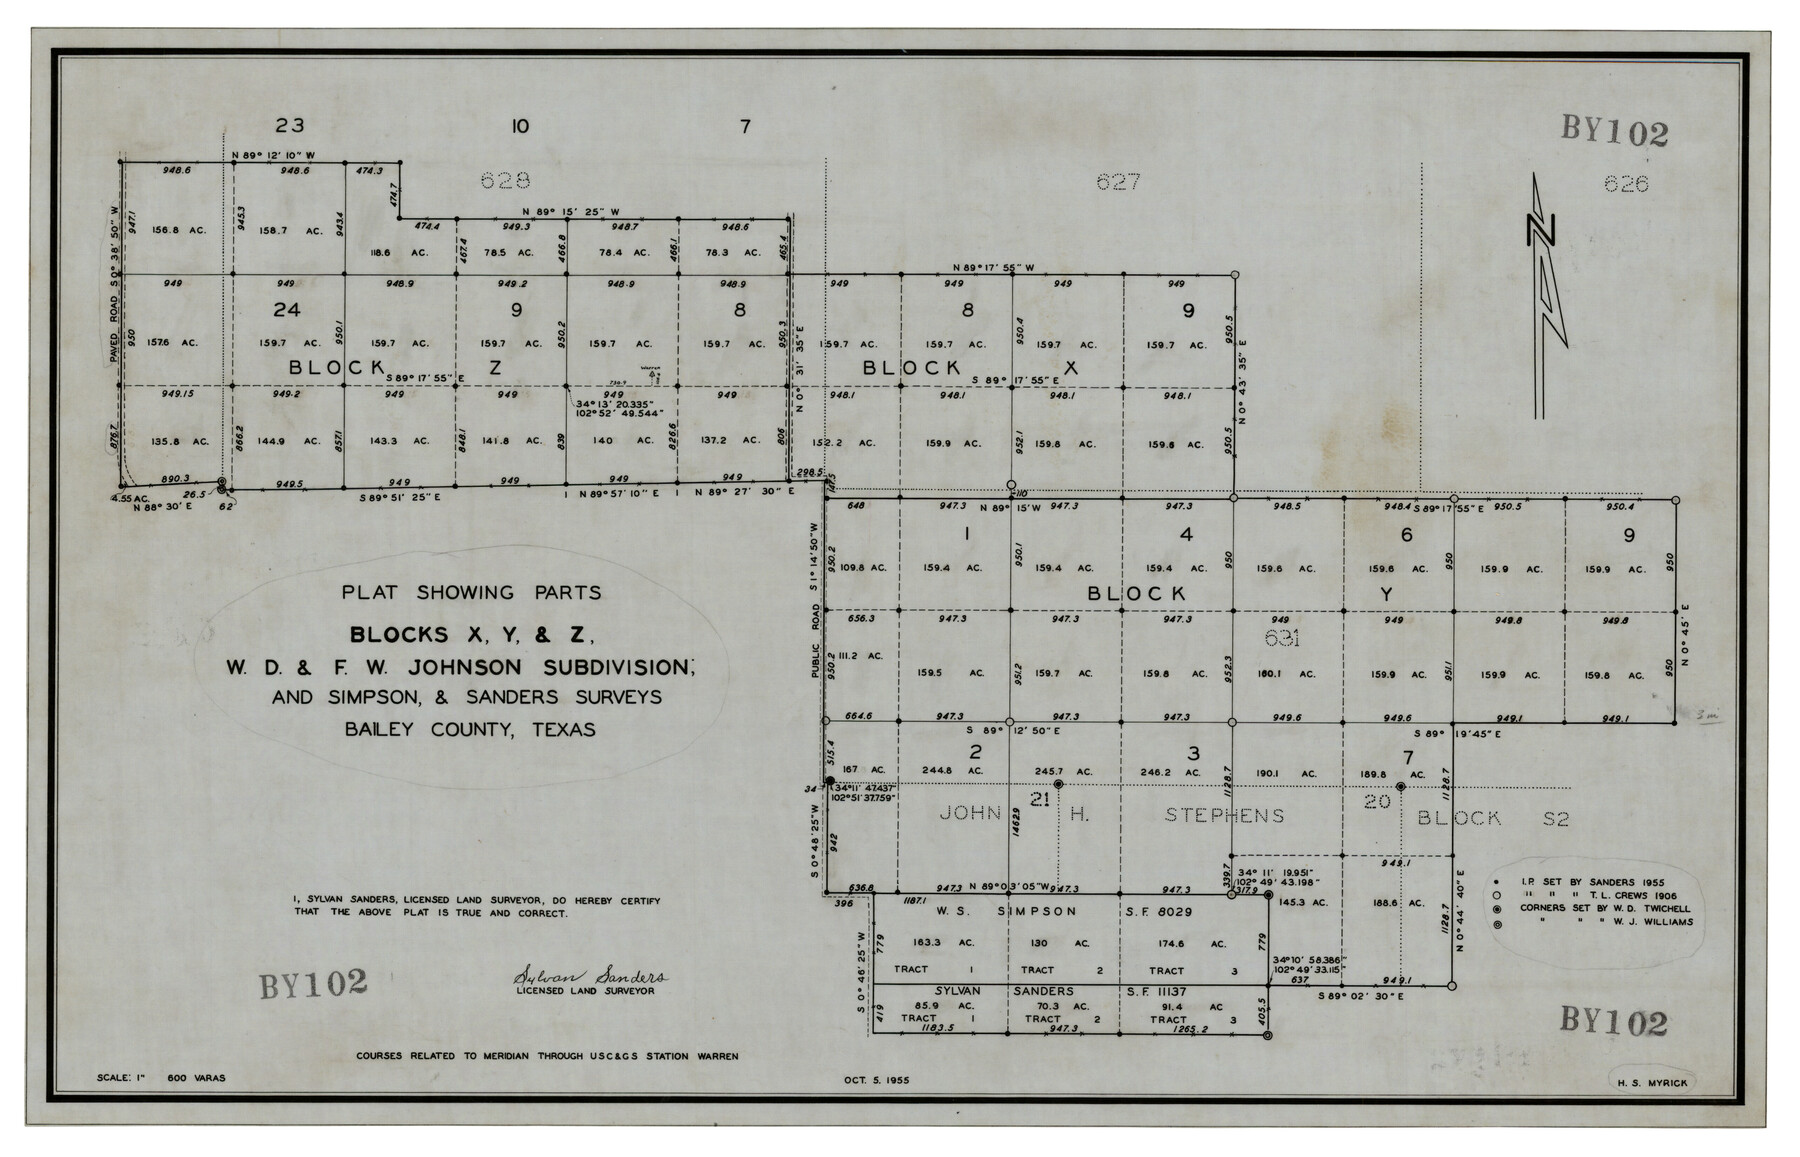 92501, Plat Showing Parts of Blocks X, Y, and Z, W.D. and F. W. Johnson Subdivision, Twichell Survey Records